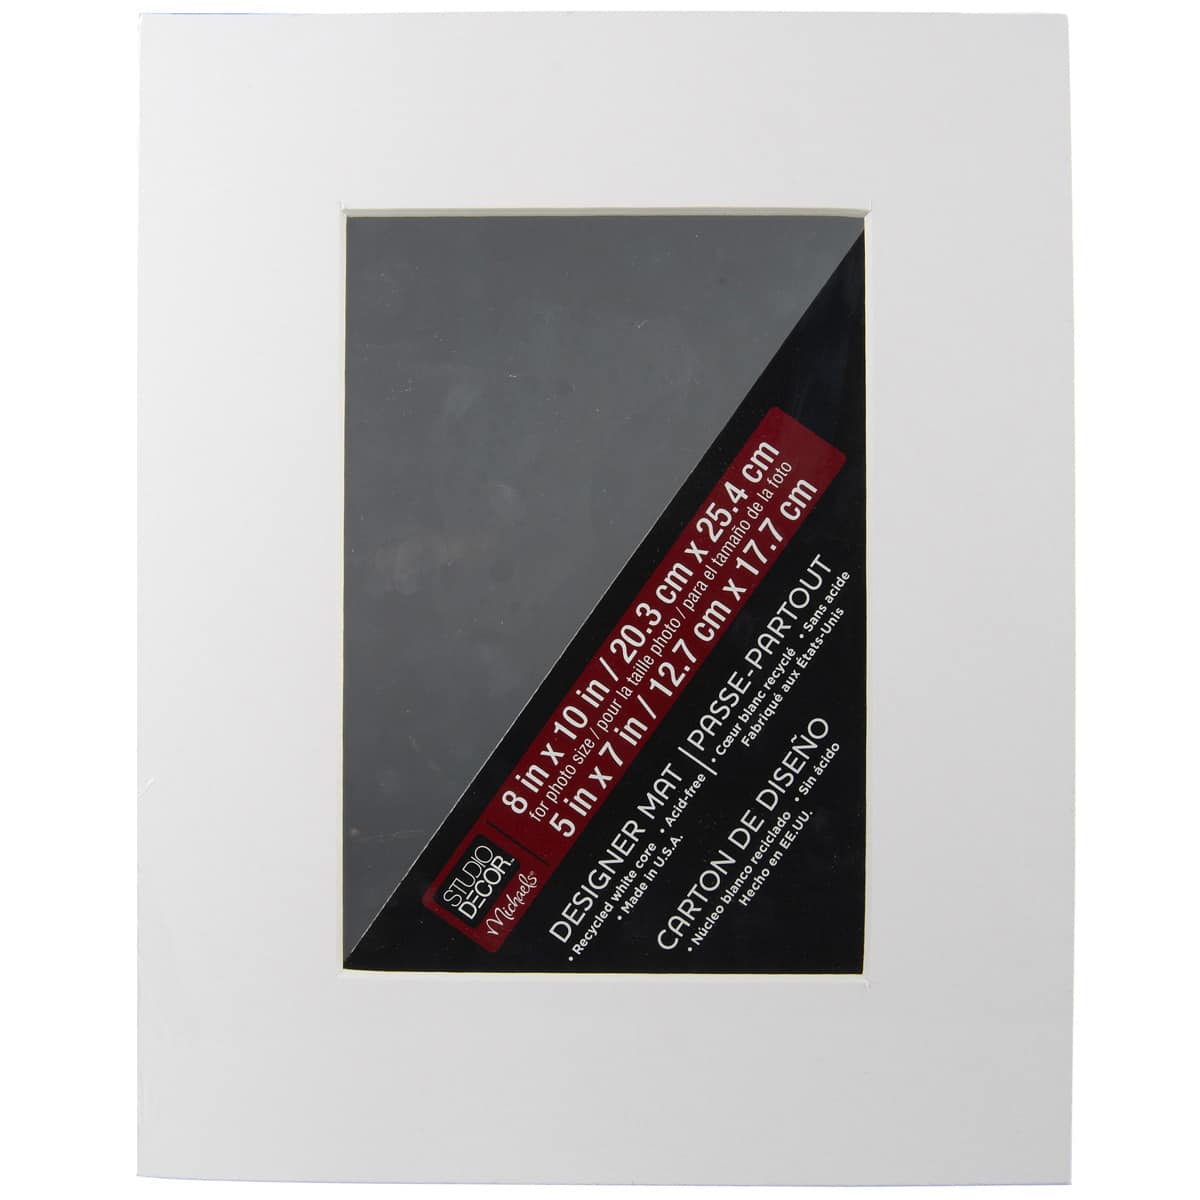 Pack of 10 Black Pre-Cut 8x10 mats for 5x7 Pictures by Verita Vision.  Includes 10 Premium Acid-Free Black Core Bevel Cut 5x7 Matte for 8x10  Frame